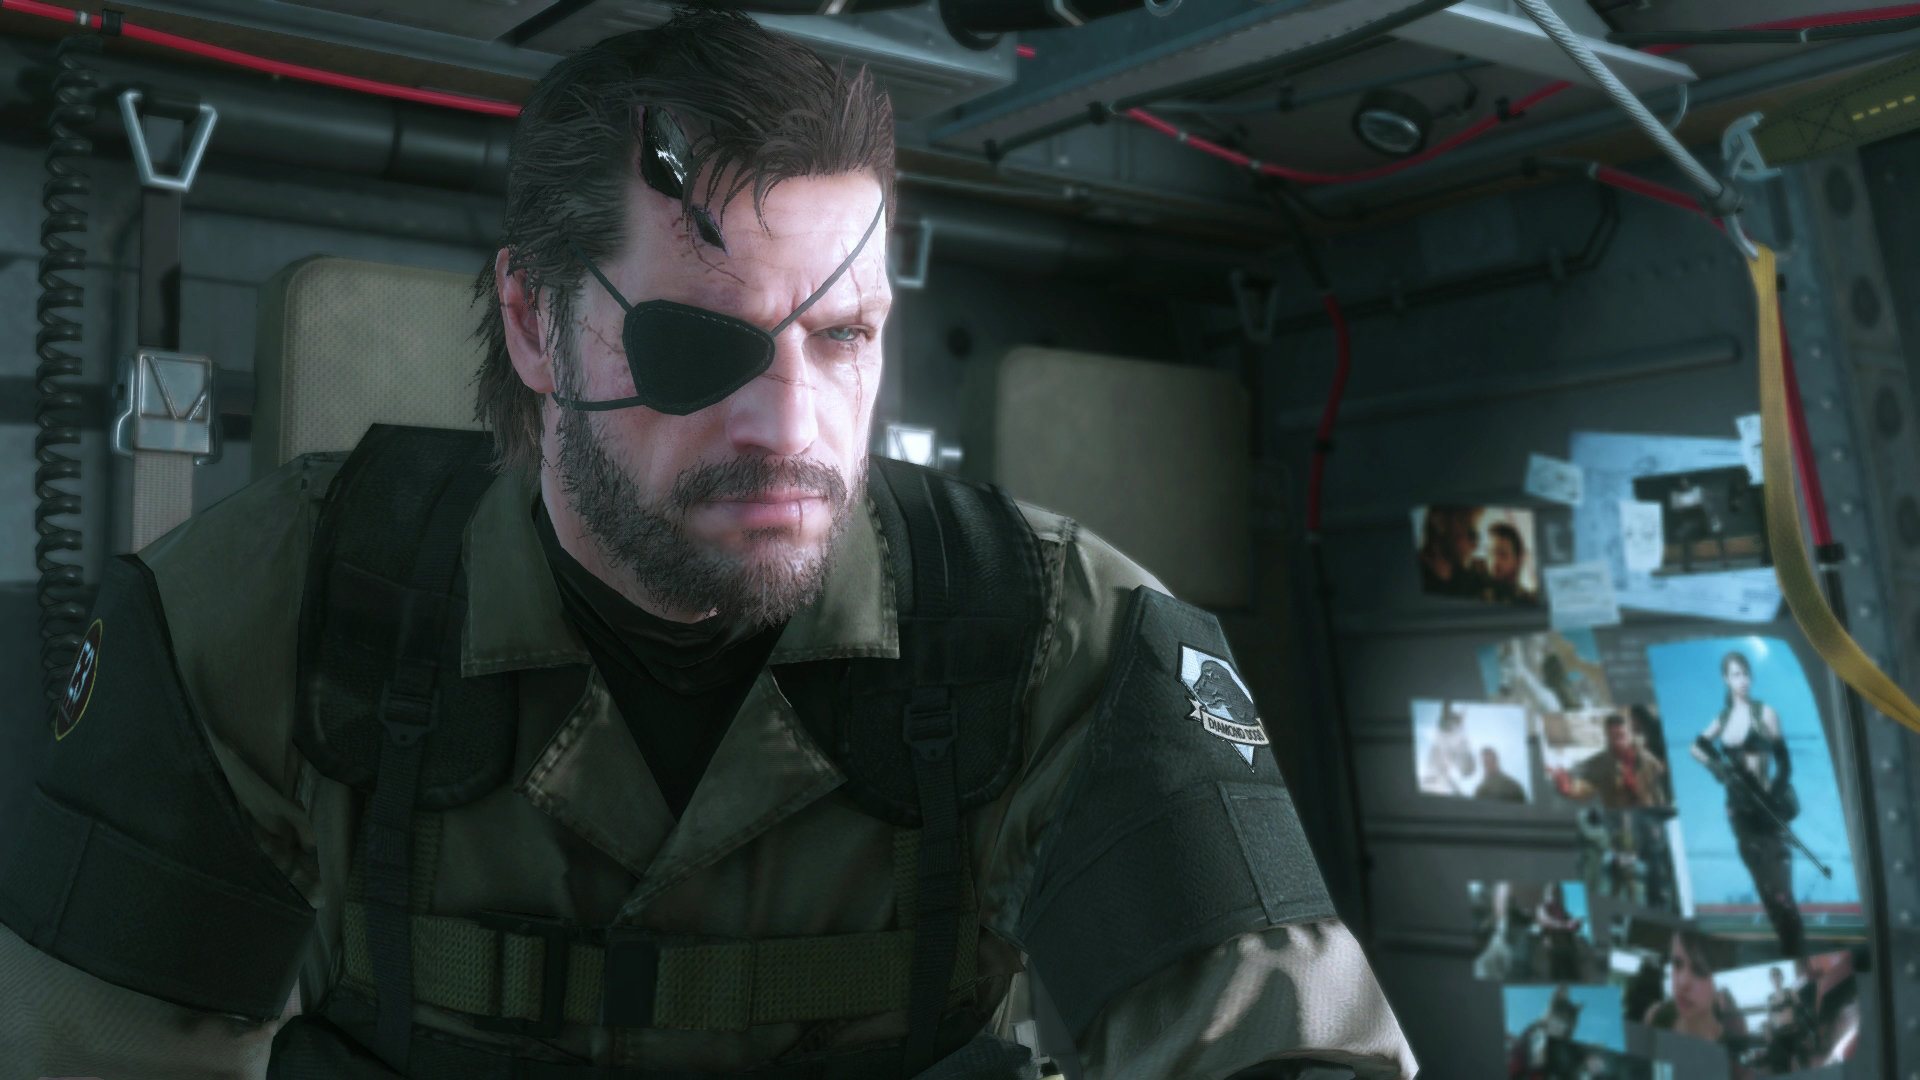 Download hd 1080p Metal Gear Solid 5 (V): The Phantom Pain (MGSV 5) desktop background ID:460443 for free